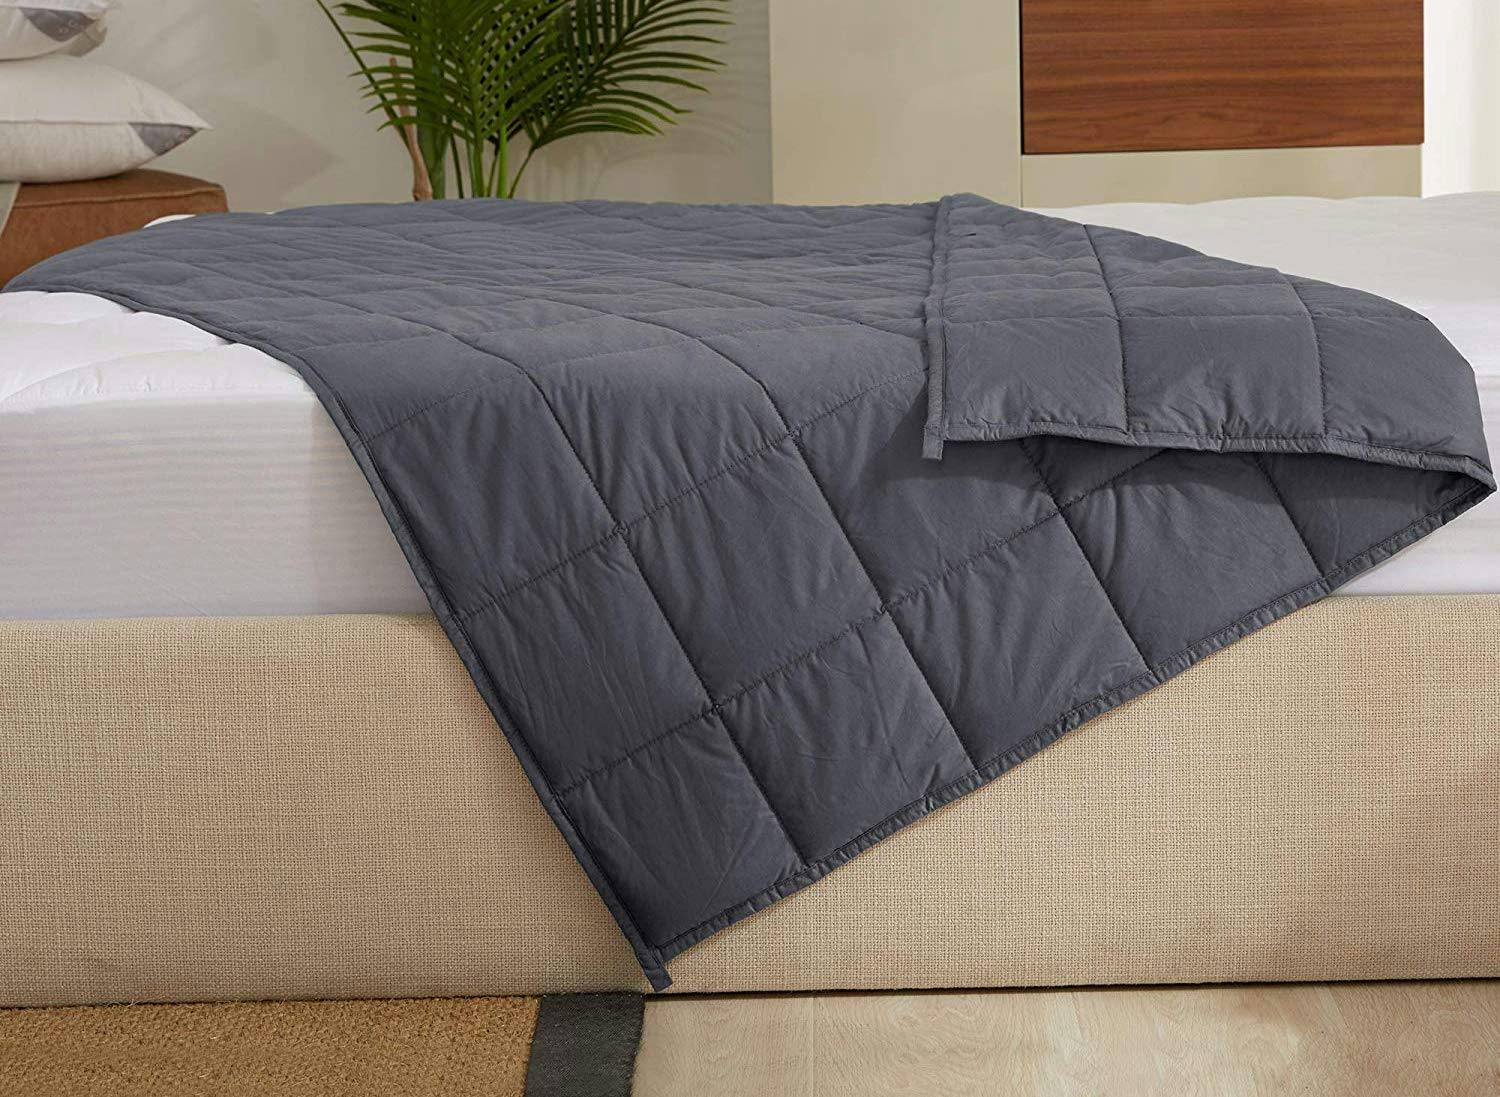 15-Pound Weighted Blanket, Only $40 - Reg. $150! - The Krazy Coupon Lady